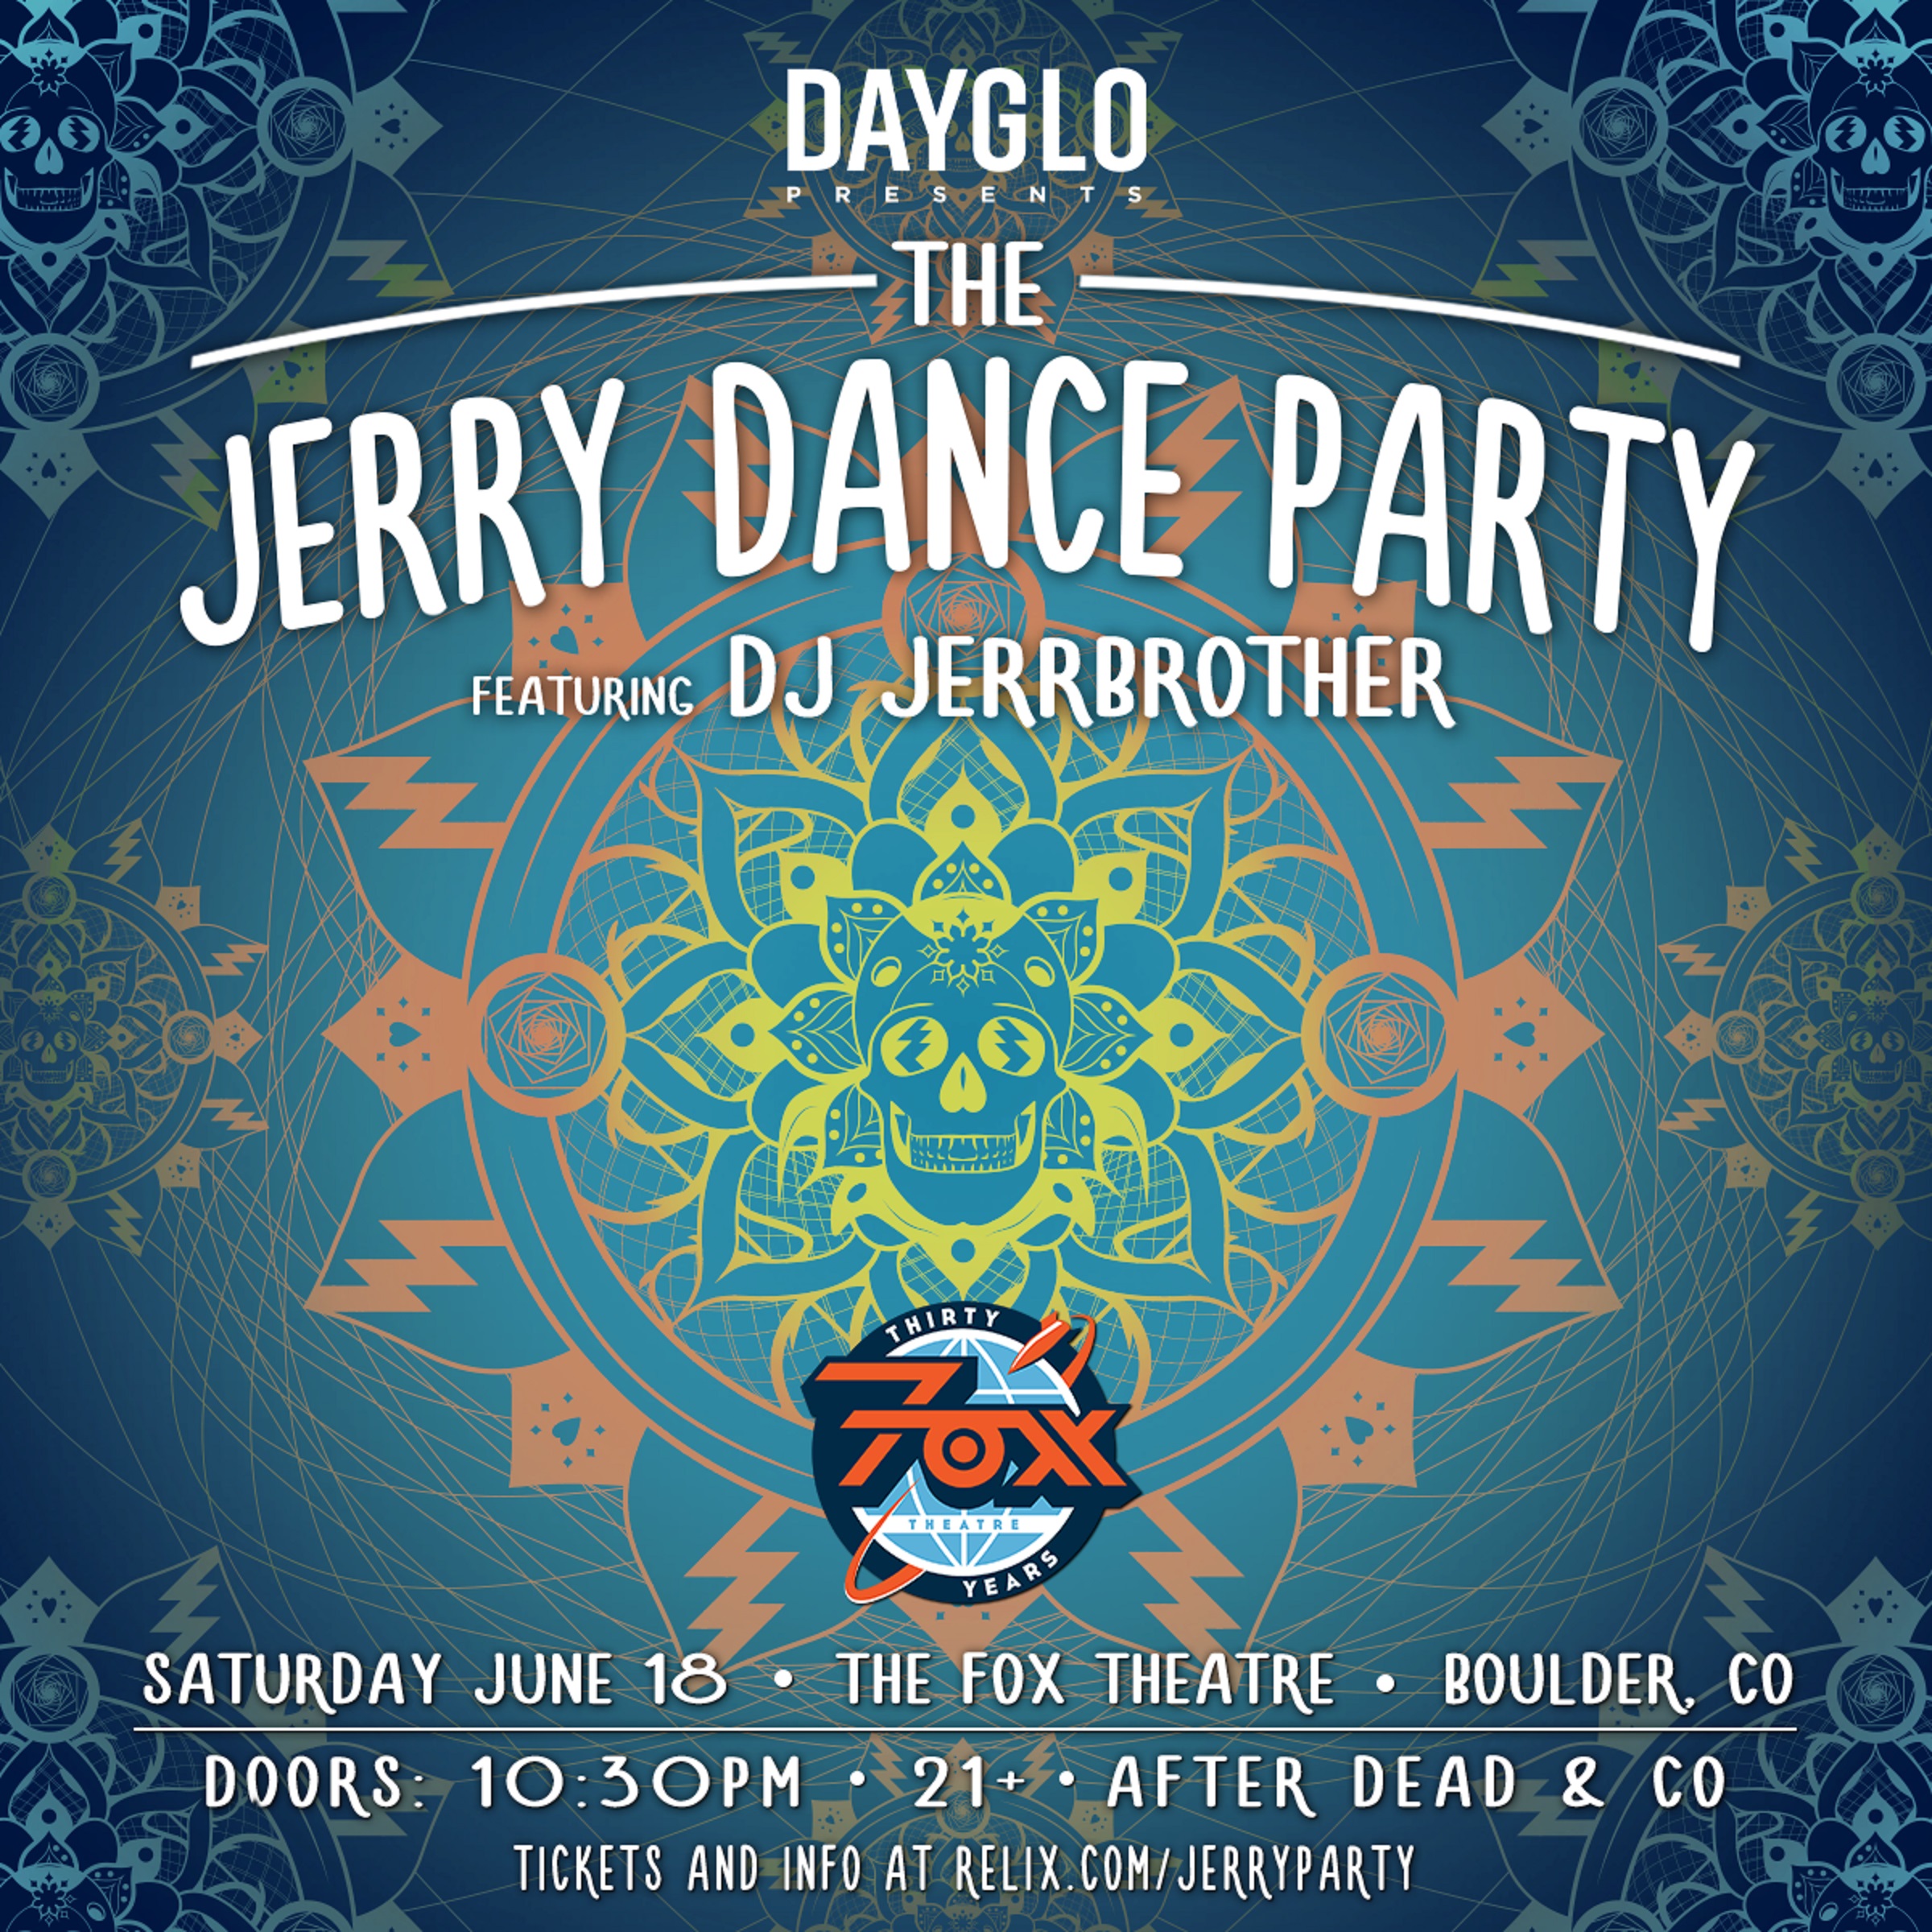 Dead & Company After Party - Jerry Dance Party at Fox Theatre